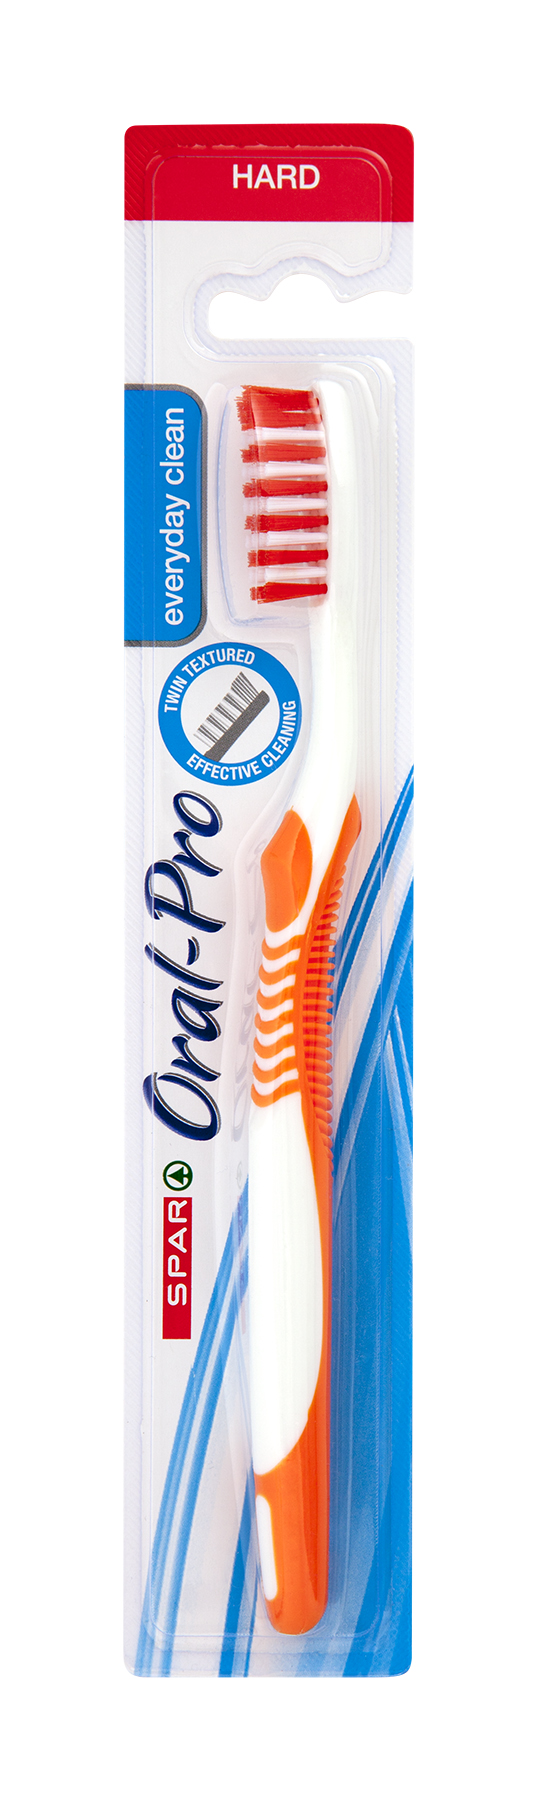 oral pro toothbrush everyday clean - hard